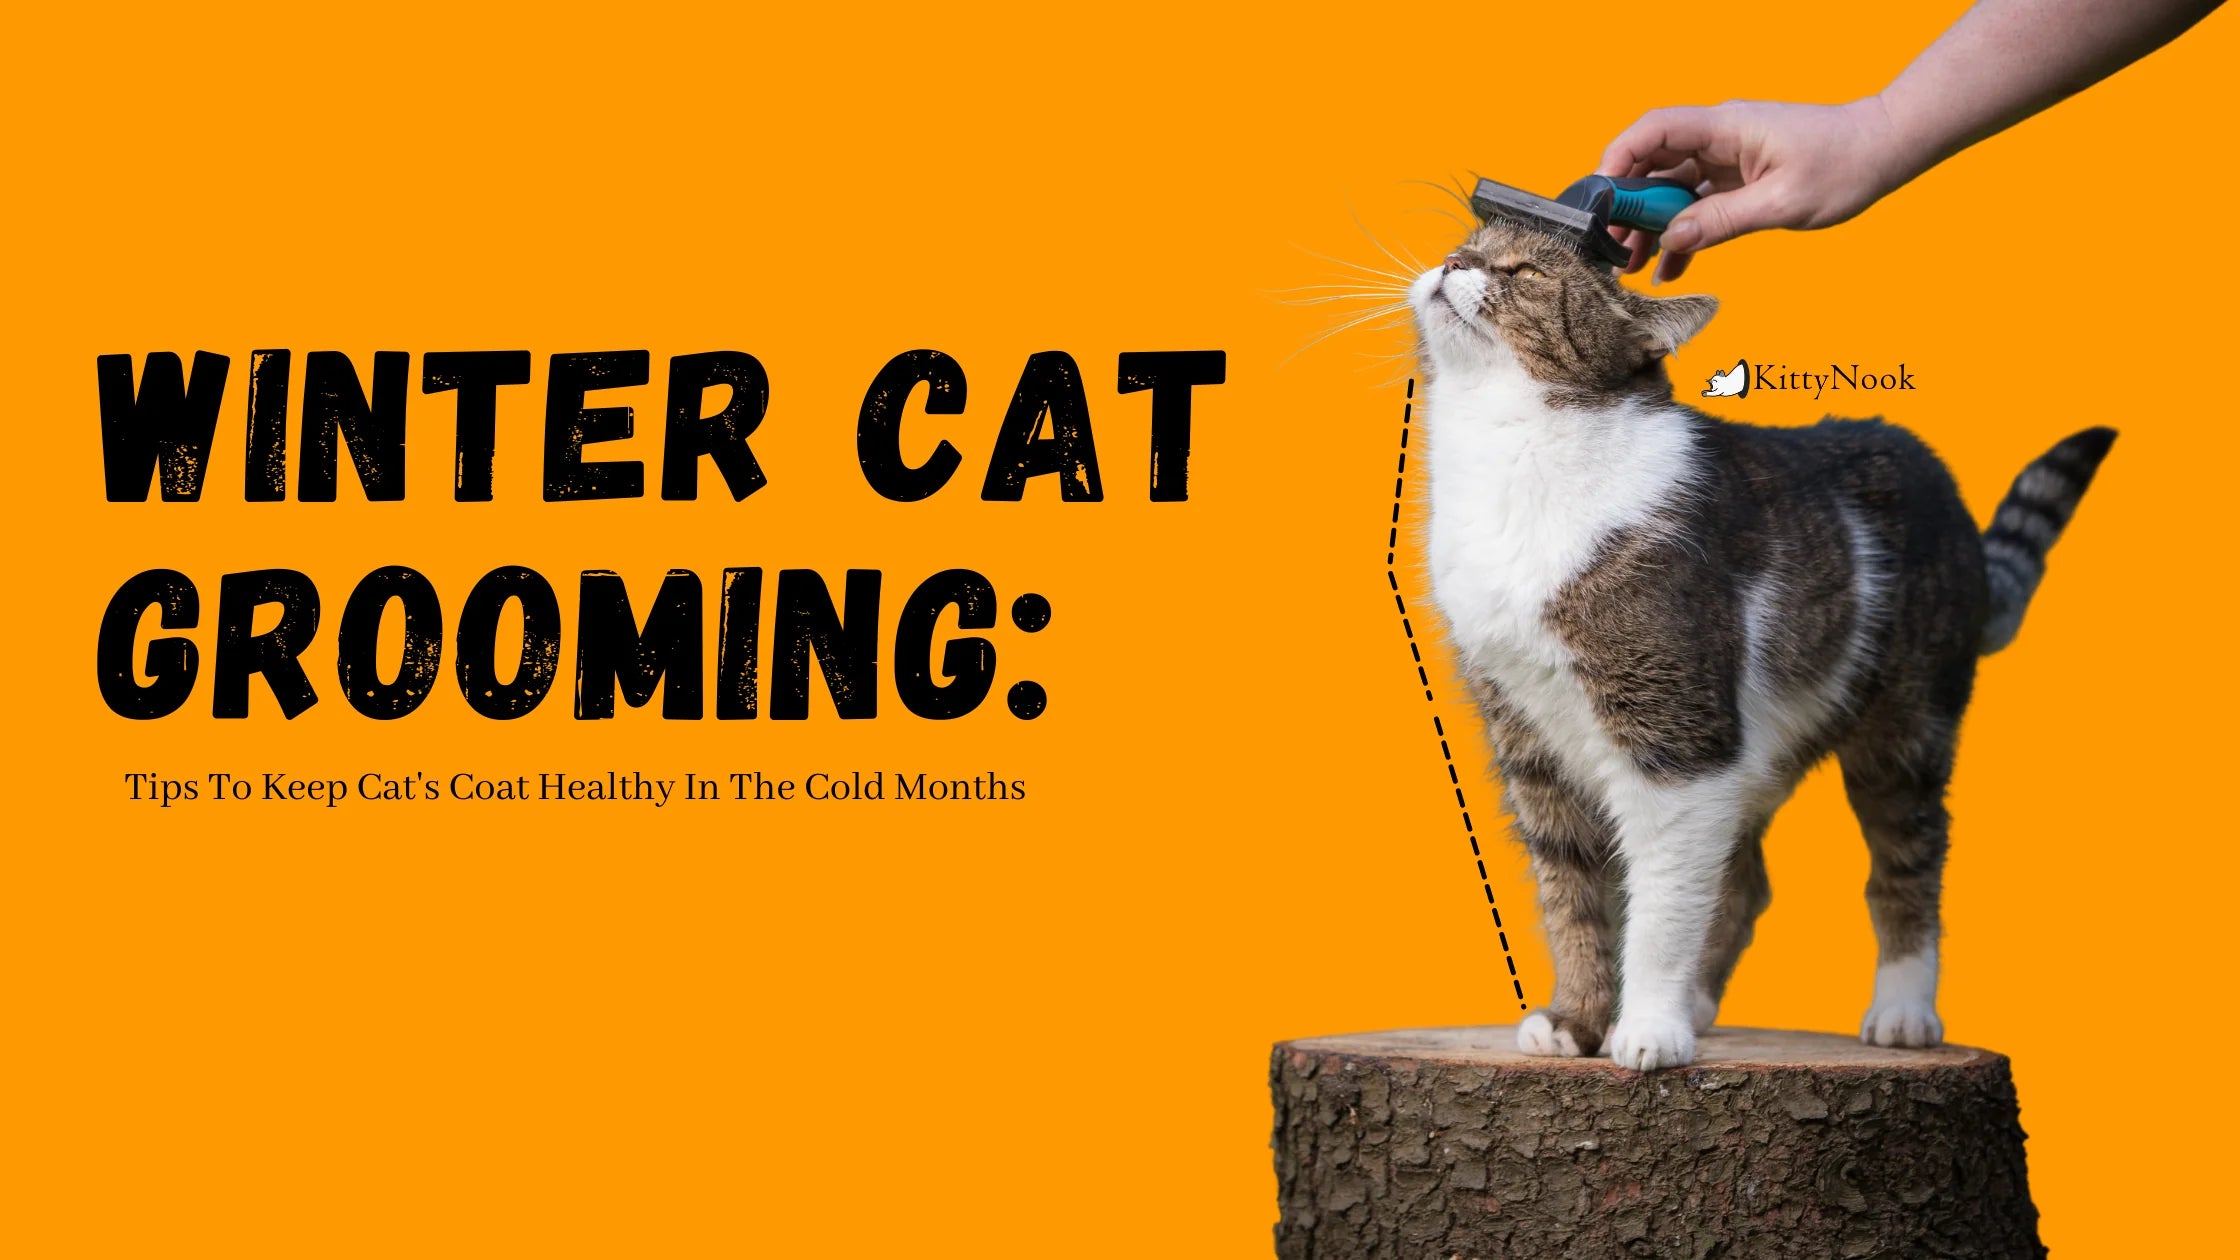 Winter Cat Grooming: Tips To Keep Cat's Coat Healthy In The Cold Months - KittyNook Cat Company